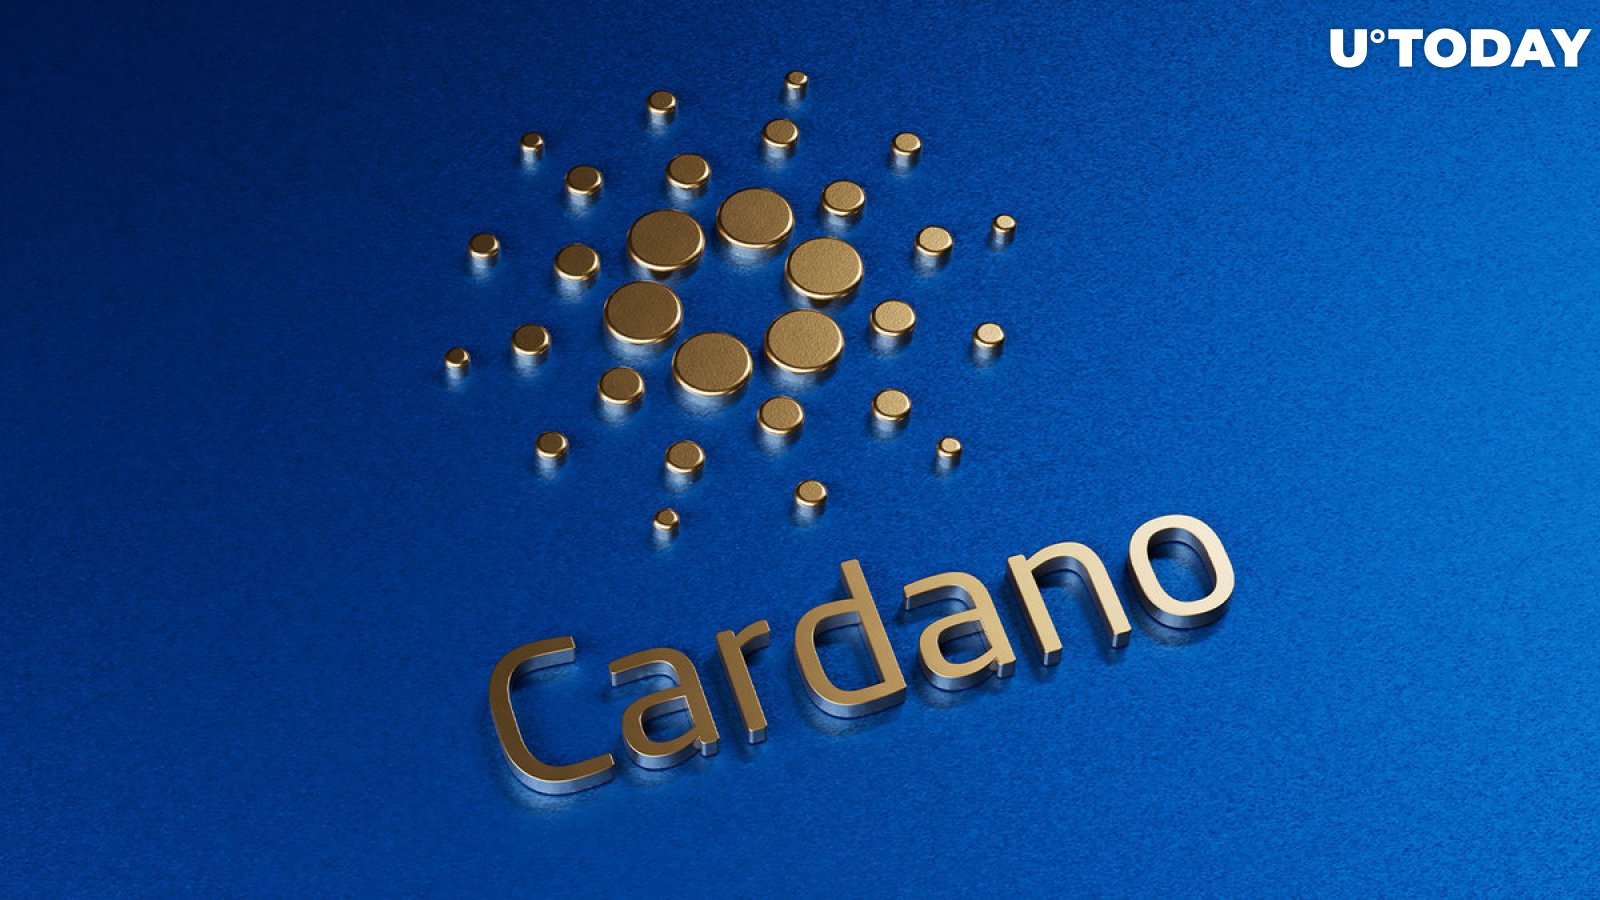 Cardano-Based Stablecoin Djed on Track to Be Launched This Month 